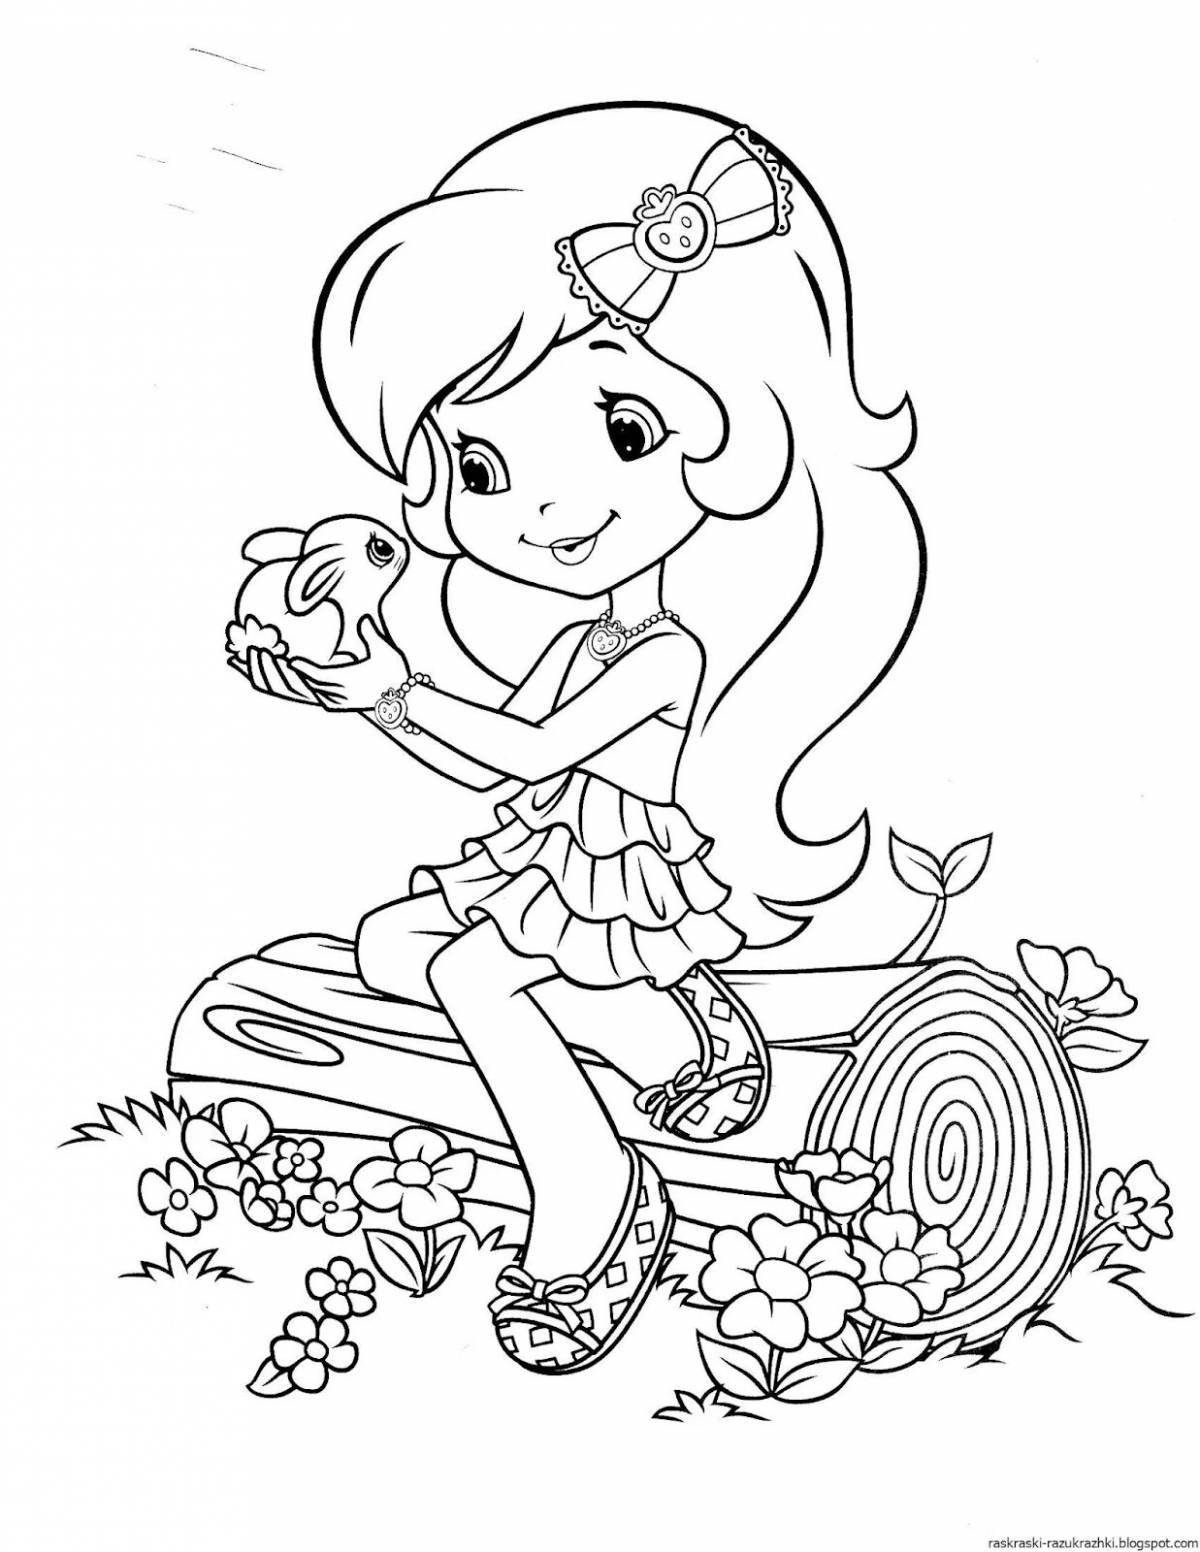 Colorful coloring book for 5 year old girls